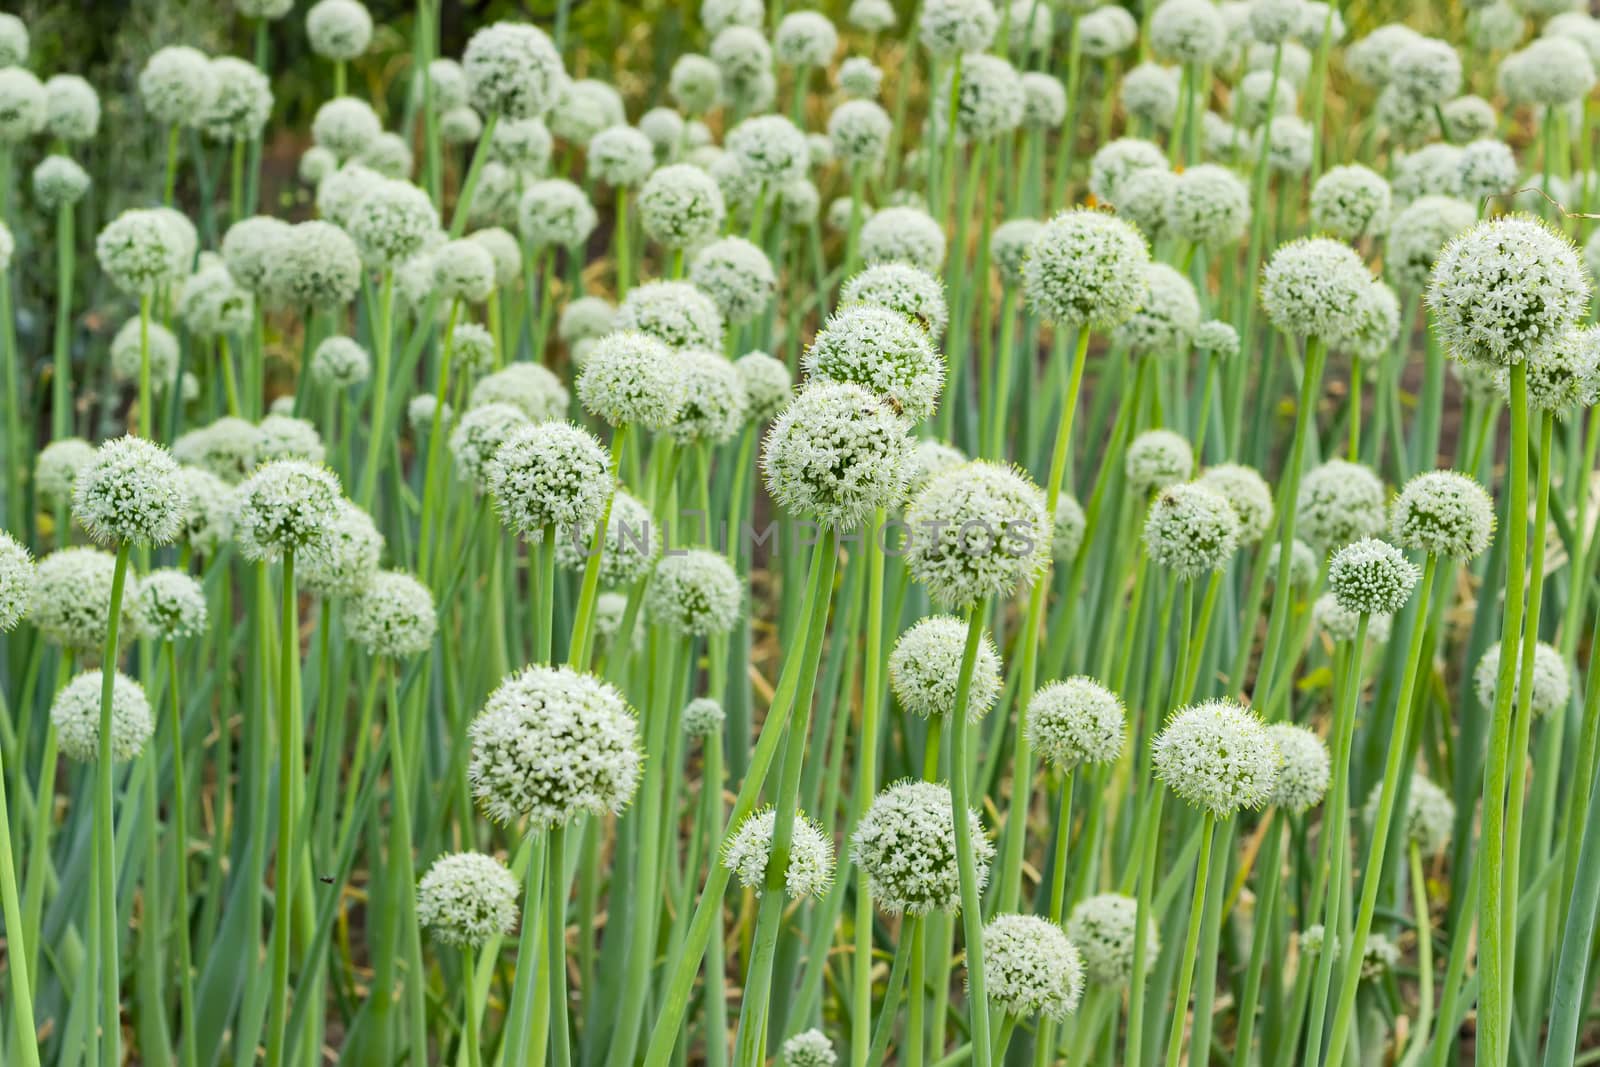 Background of the onion stems with inflorescences by anmbph